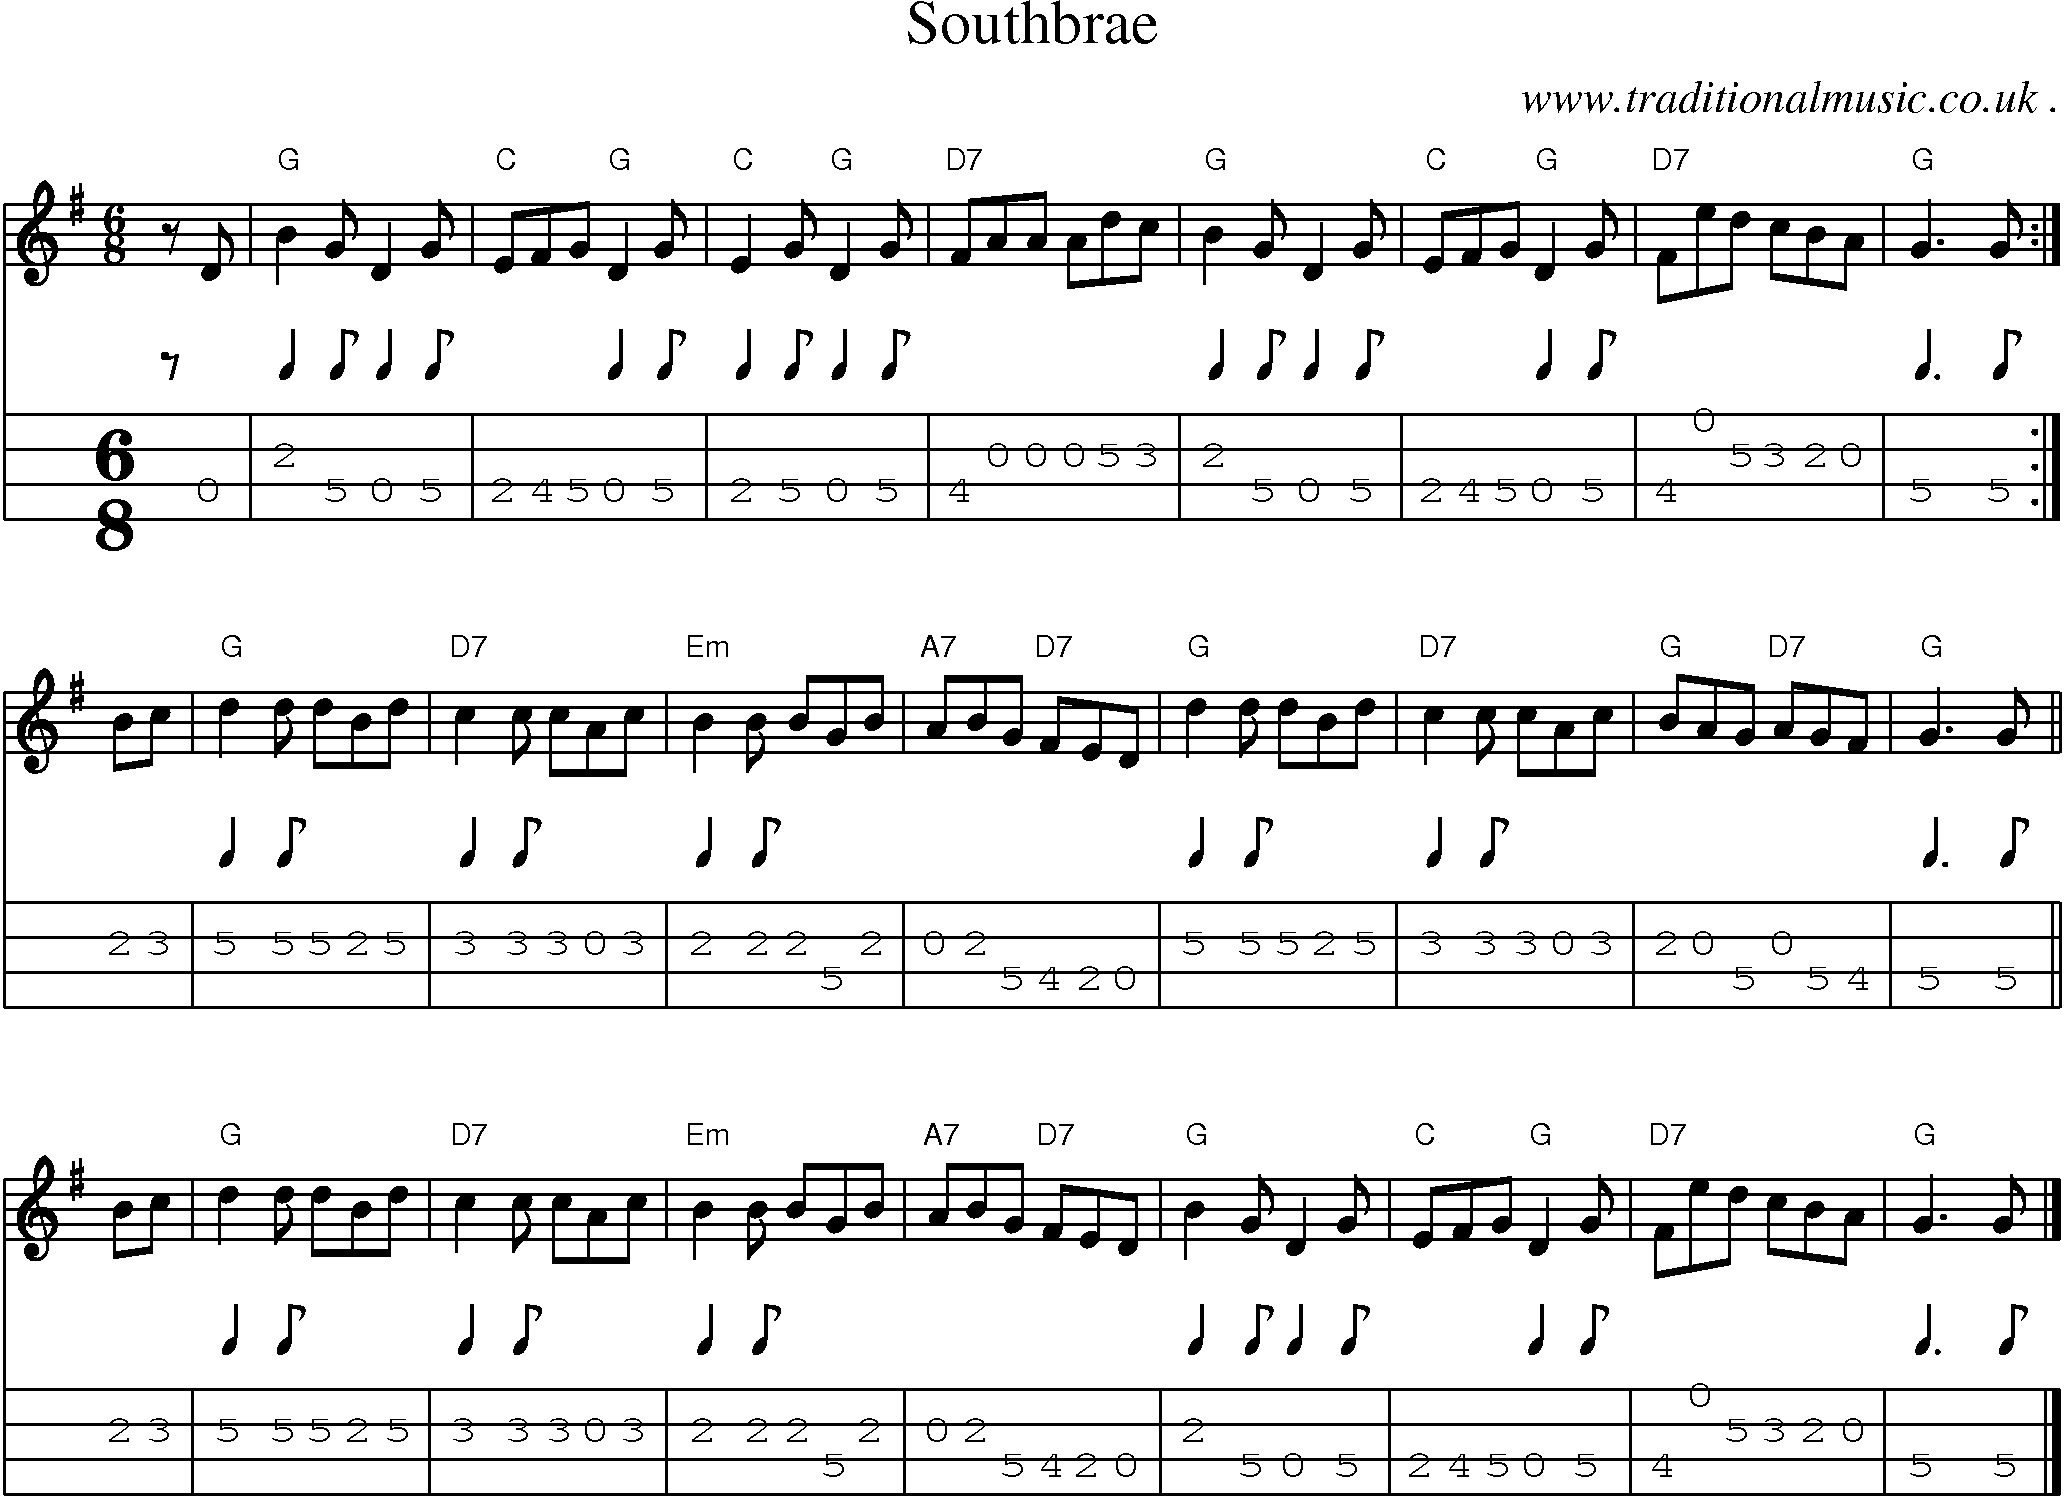 Sheet-music  score, Chords and Mandolin Tabs for Southbrae